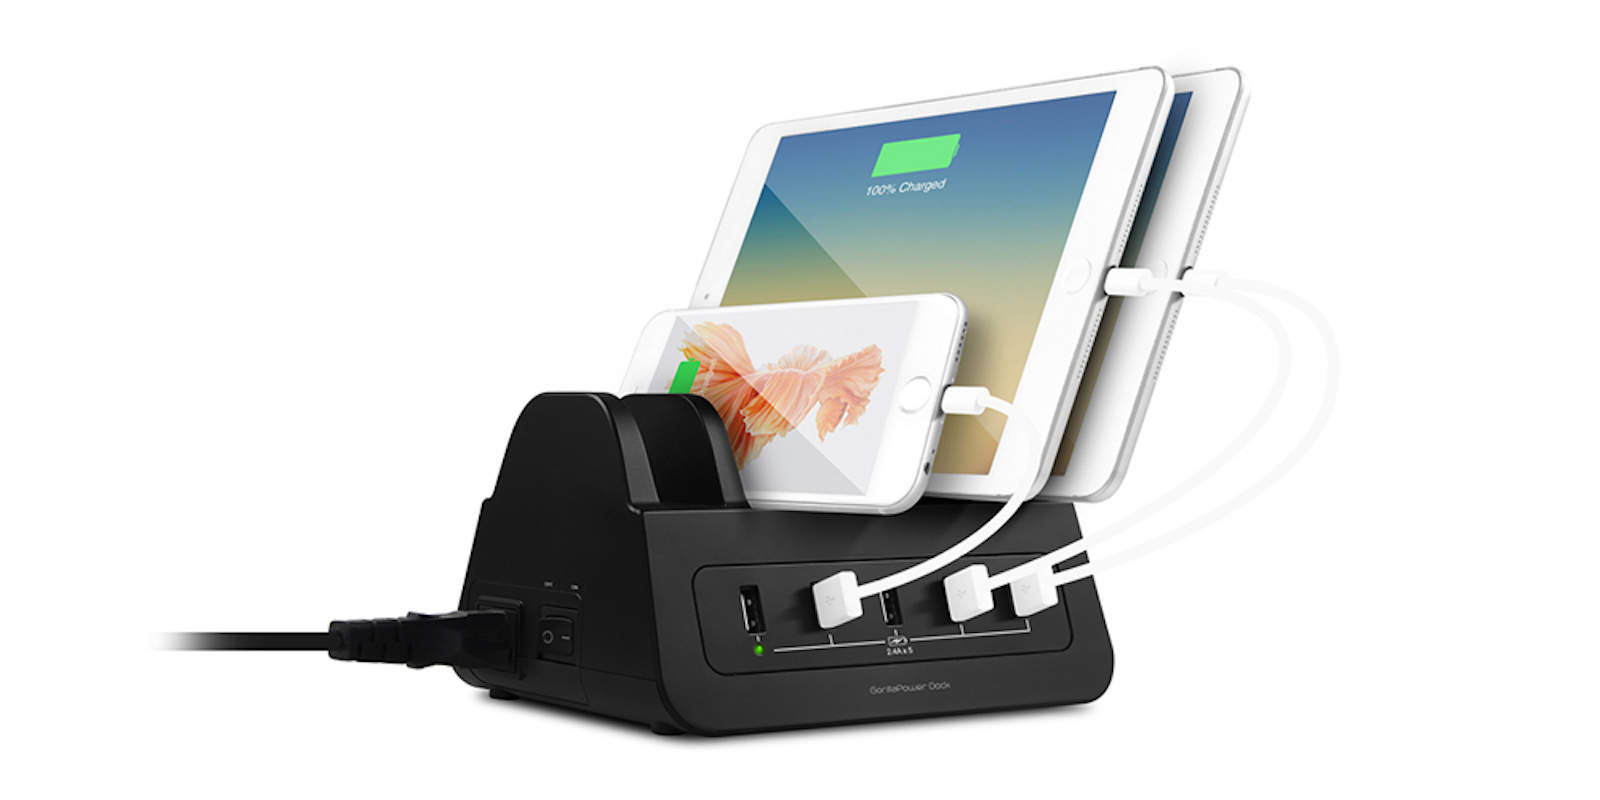 Organize your devices and charge them all at once with this convenient power hub.